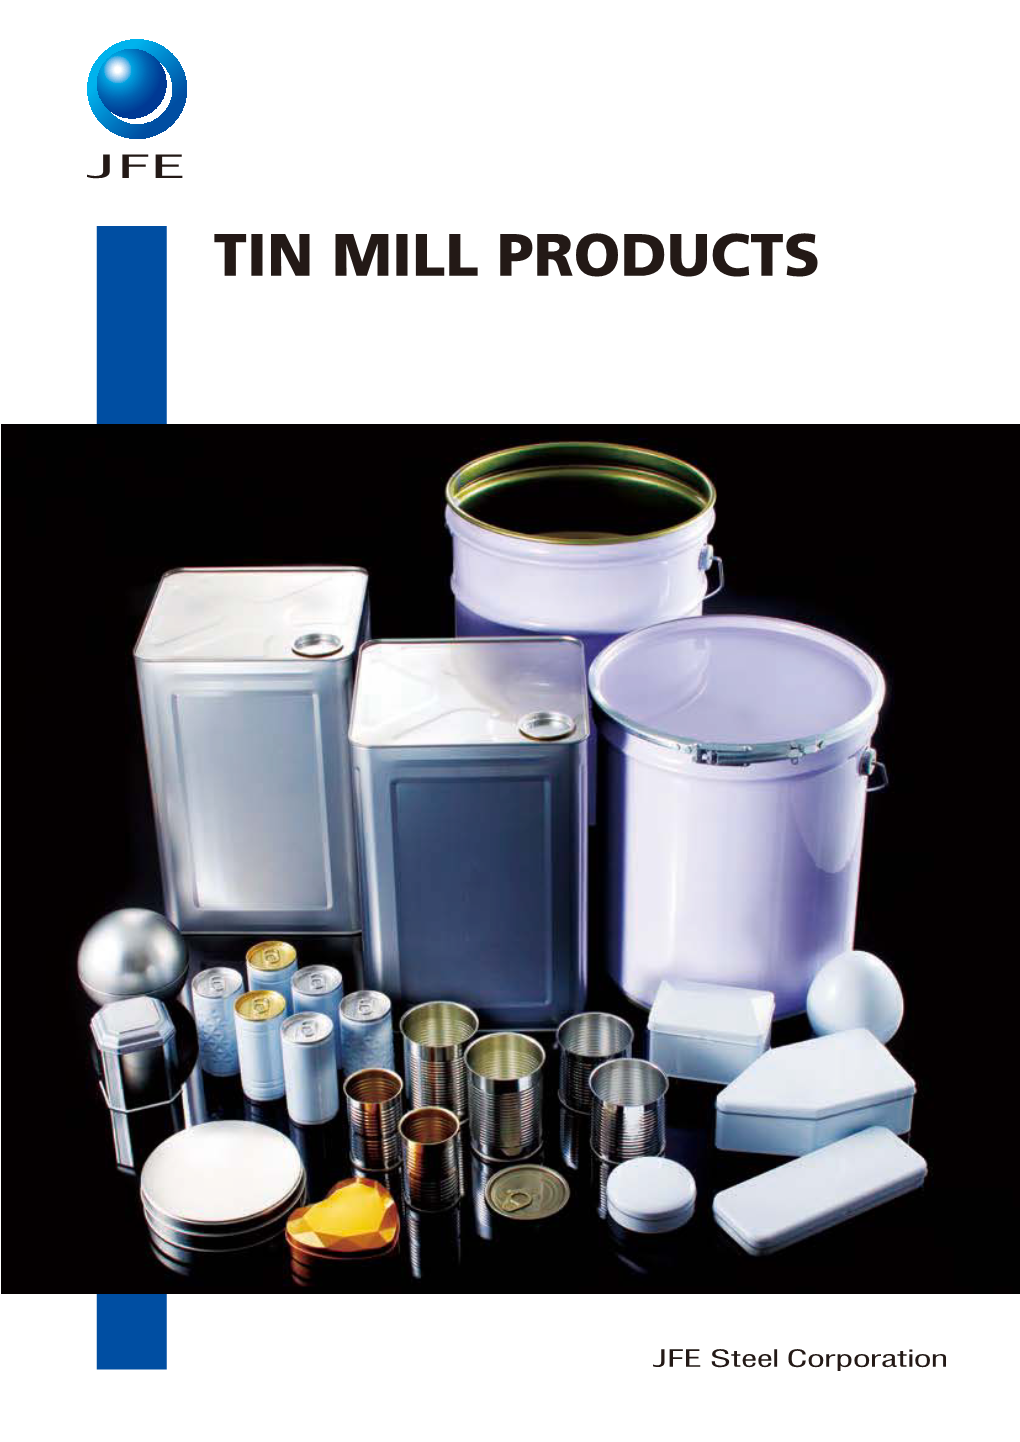 JFE Advanced Technology for Tin Mill Products